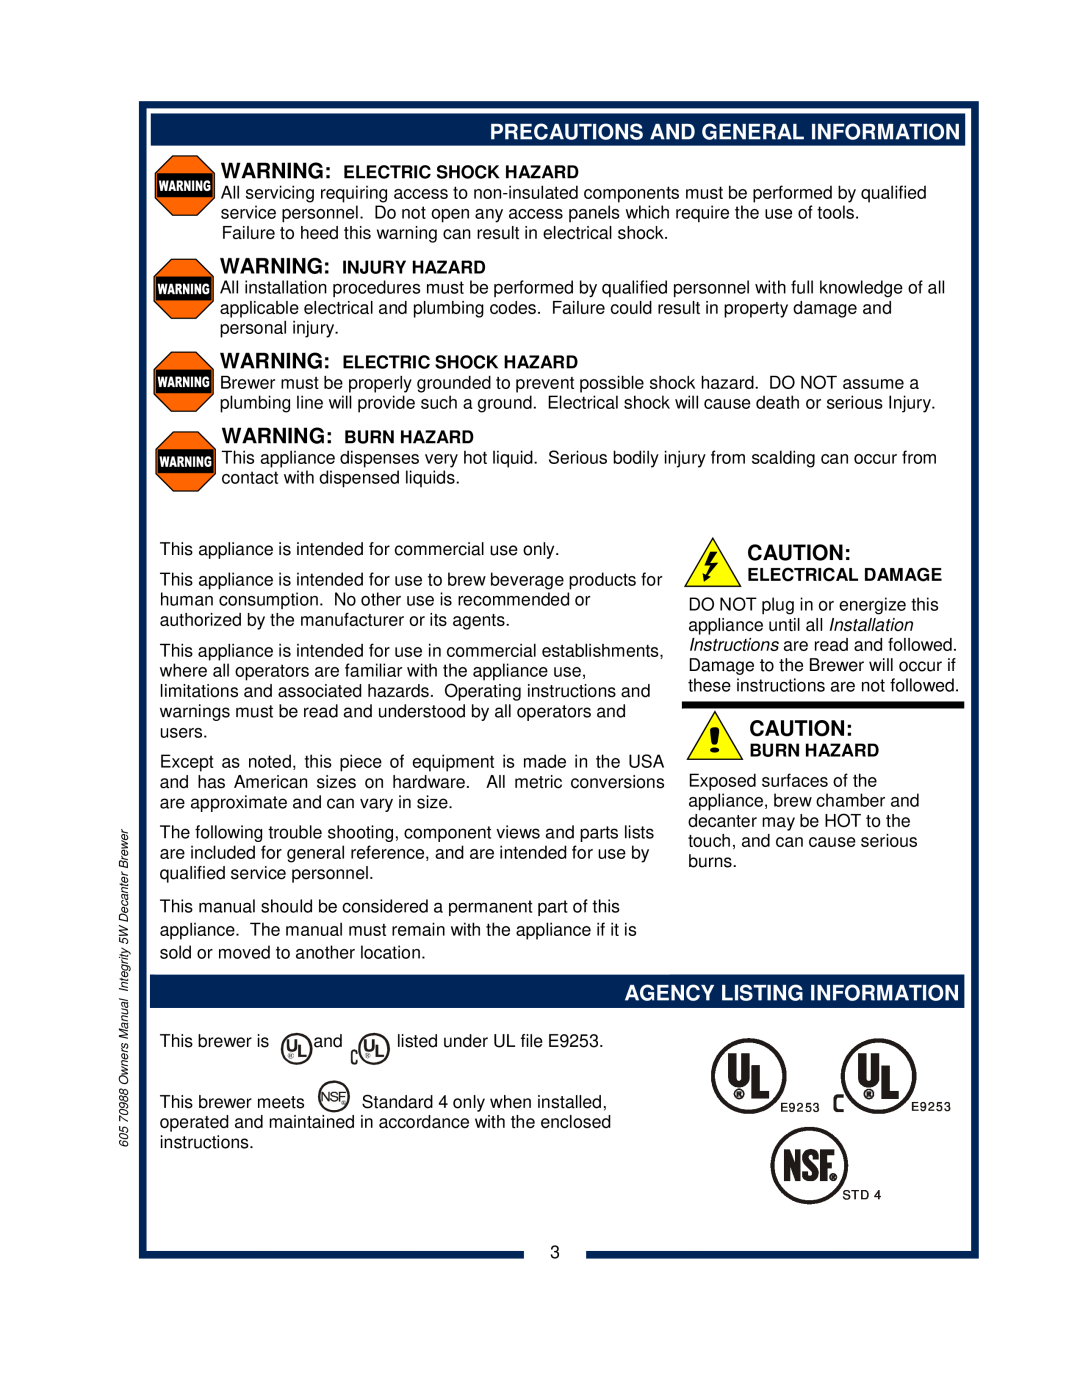 Bloomfield 8752 owner manual Precautions And General Information, Agency Listing Information, Warning Electric Shock Hazard 